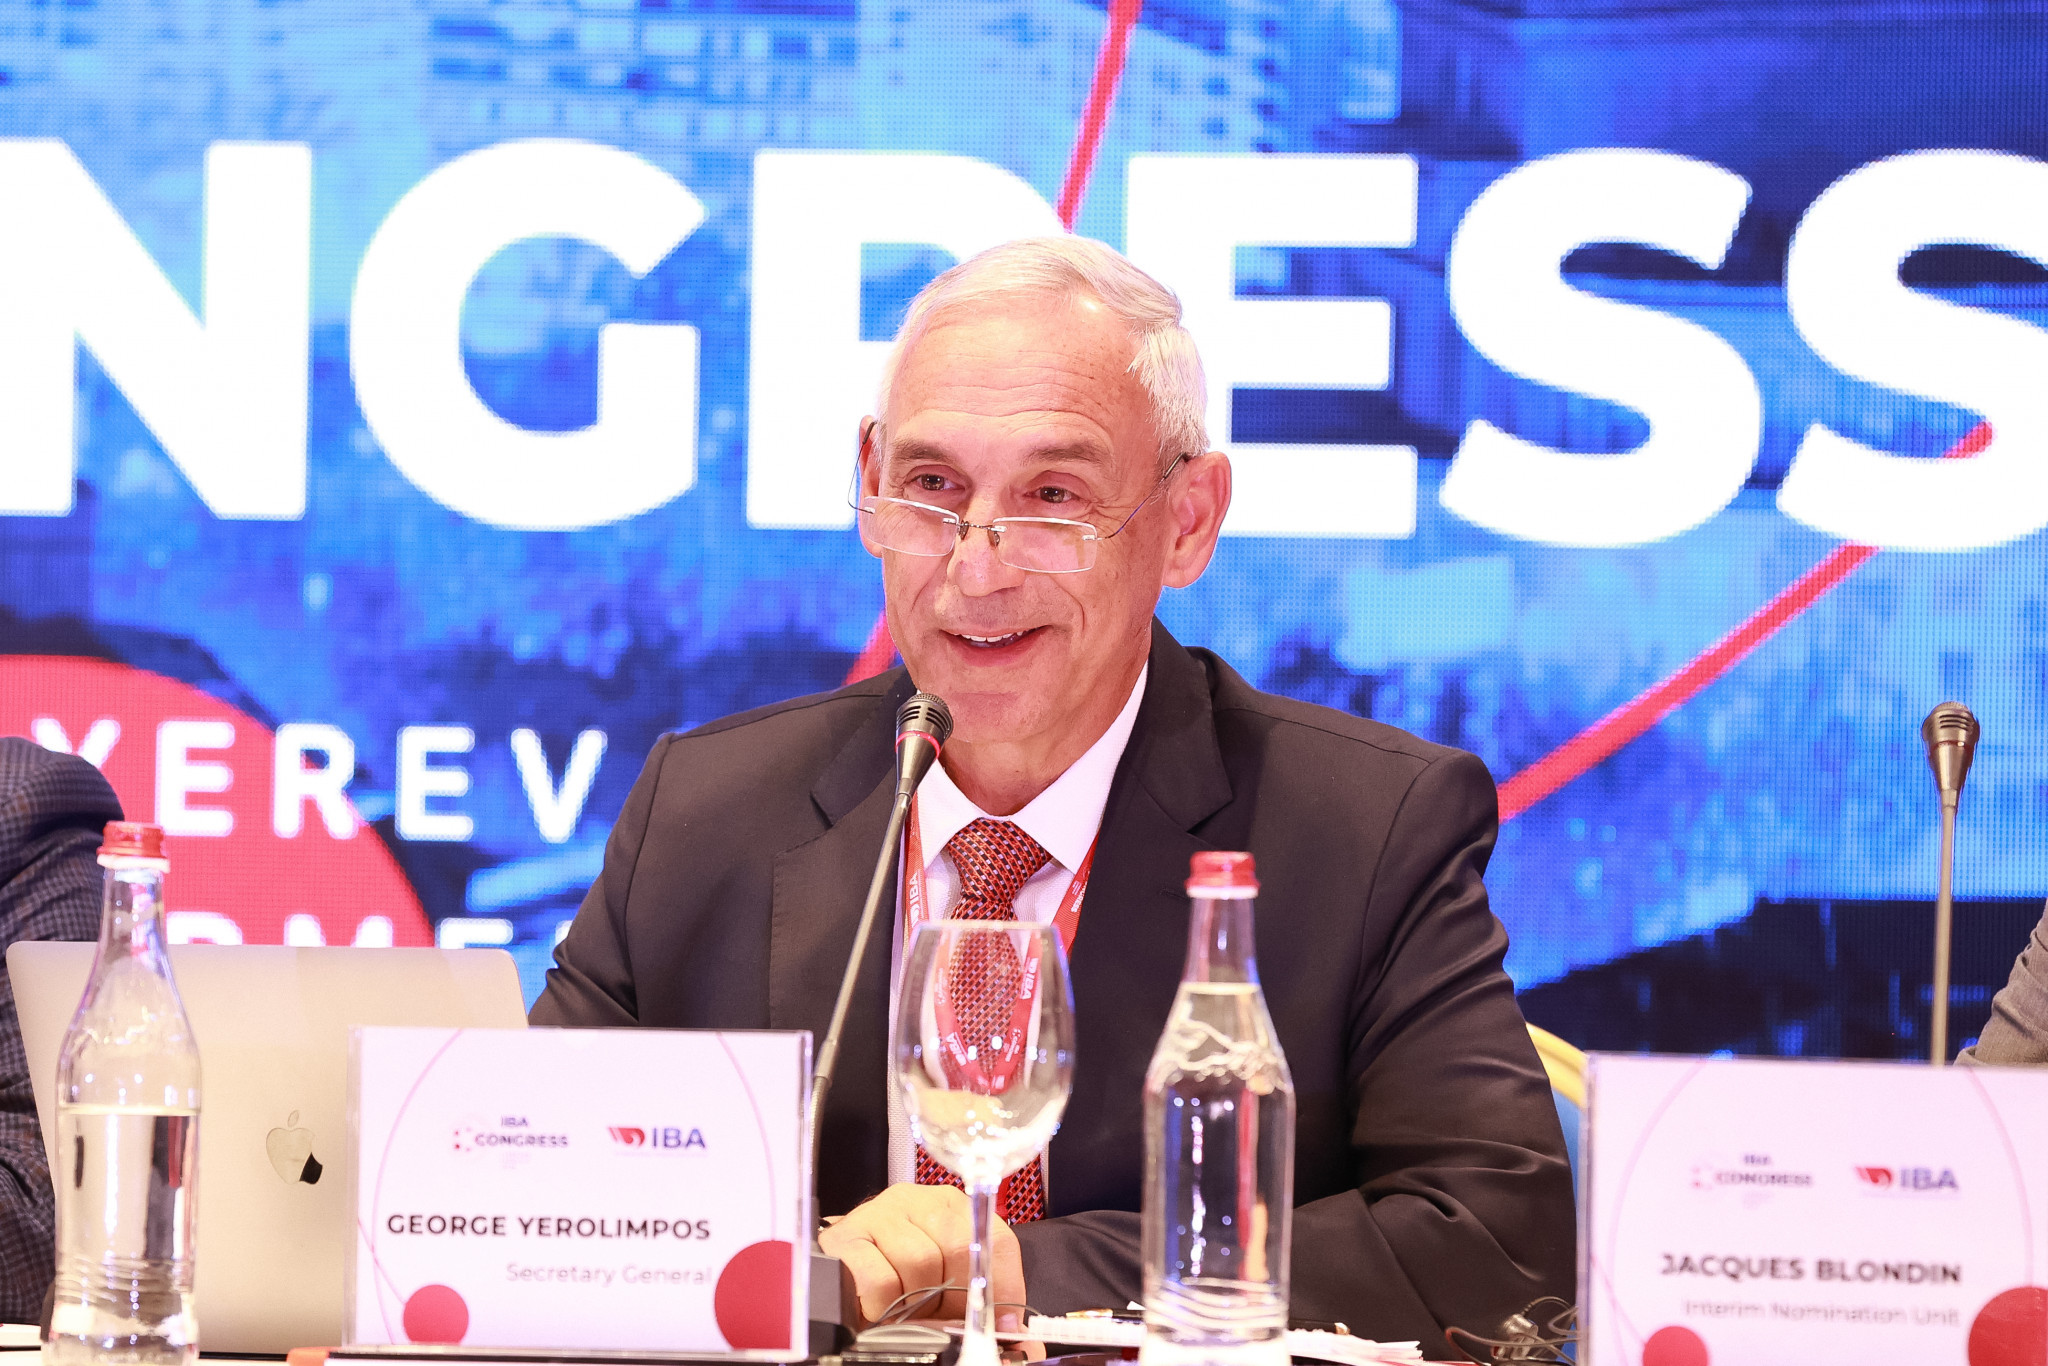 IBA secretary general and chief executive George Yerolimpos said the Women's World Championships "is shaping up to be a truly memorable event" ©IBA